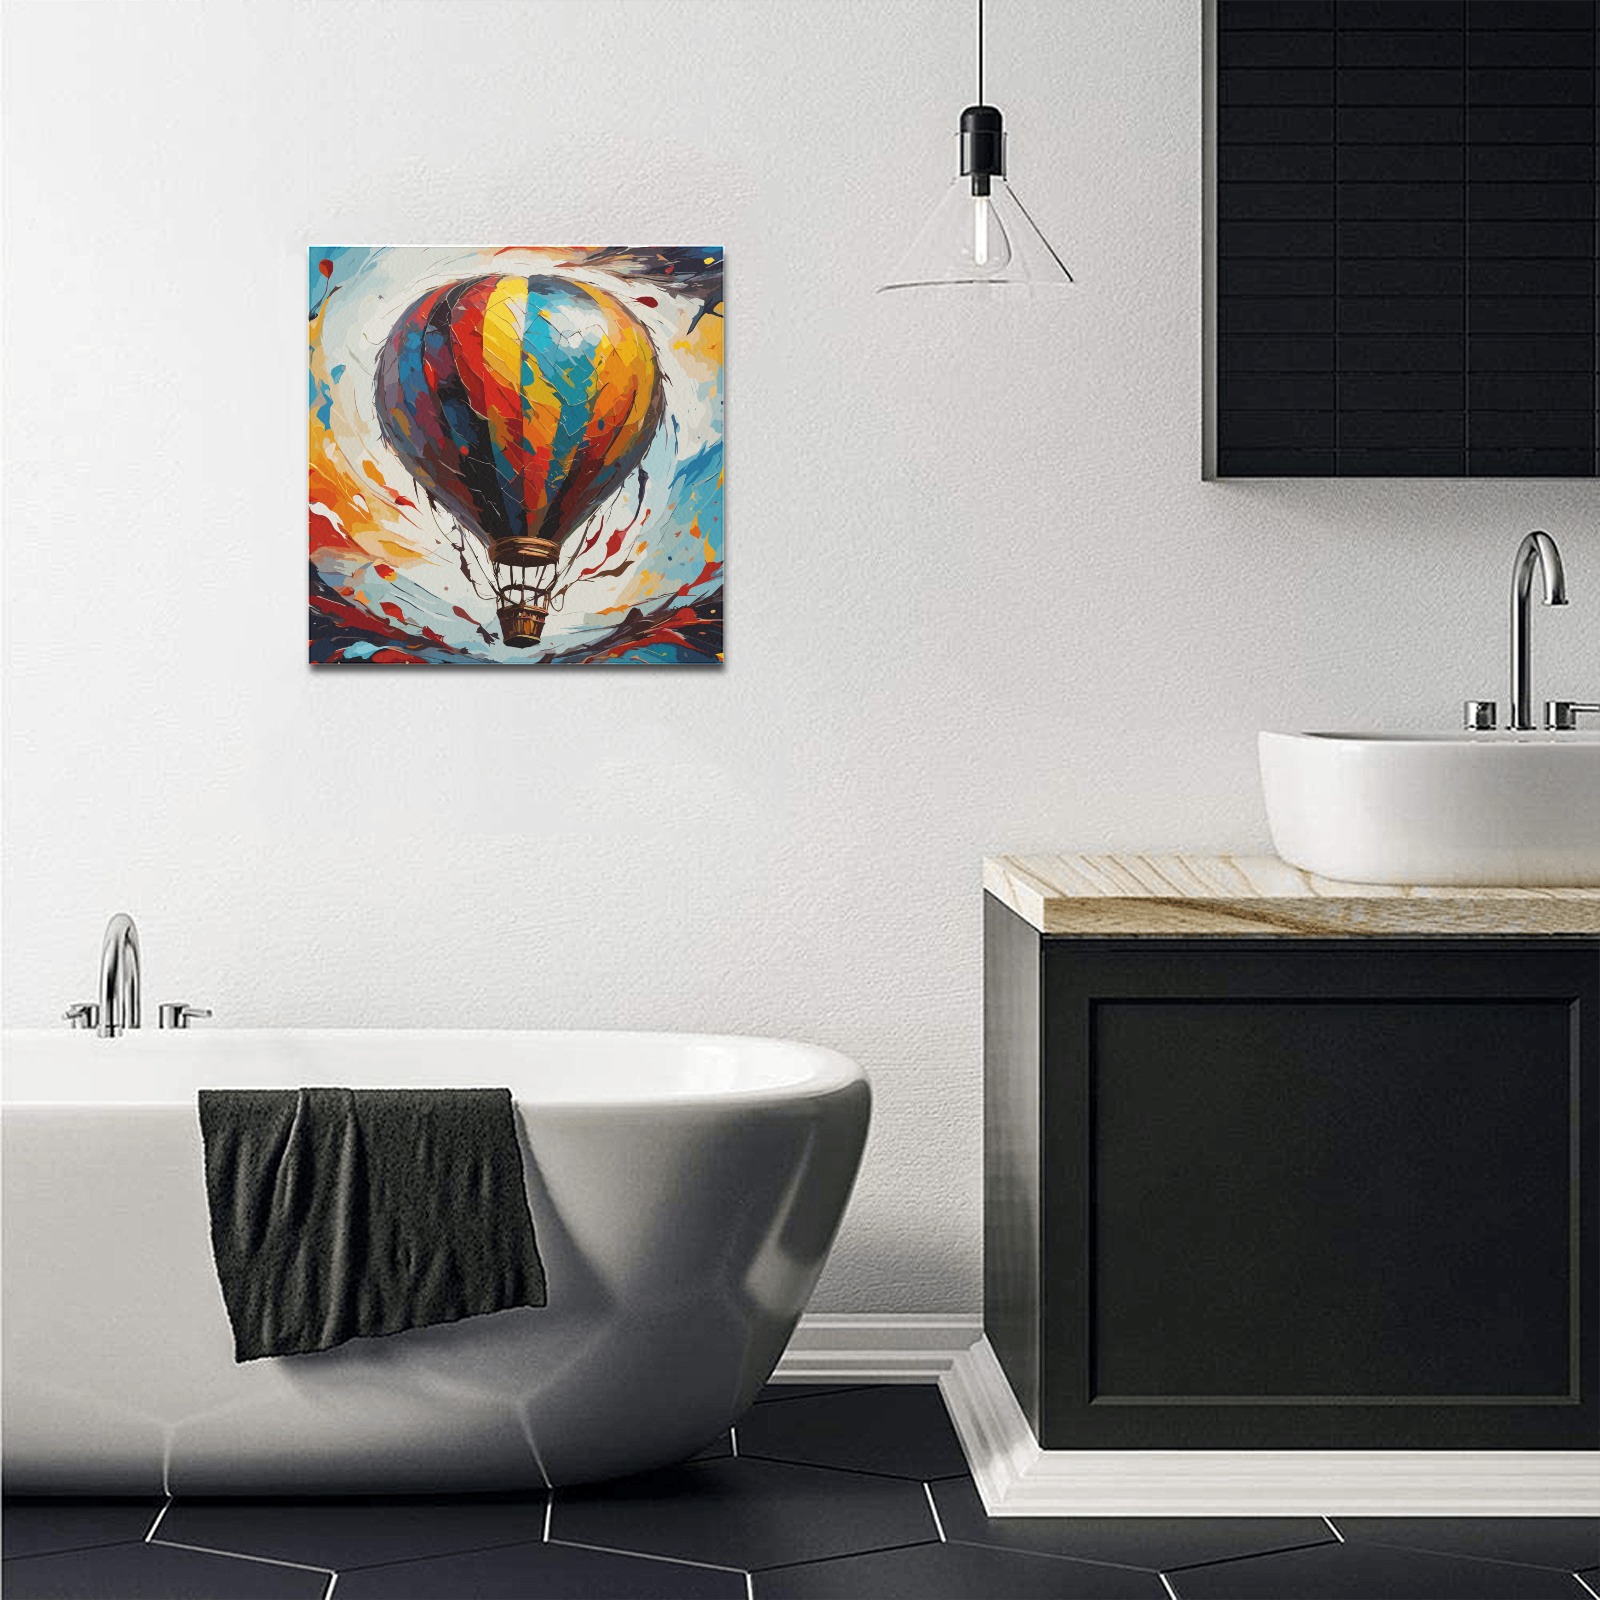 Fantasy hot air balloon in flight colorful art. Upgraded Canvas Print 16"x16"